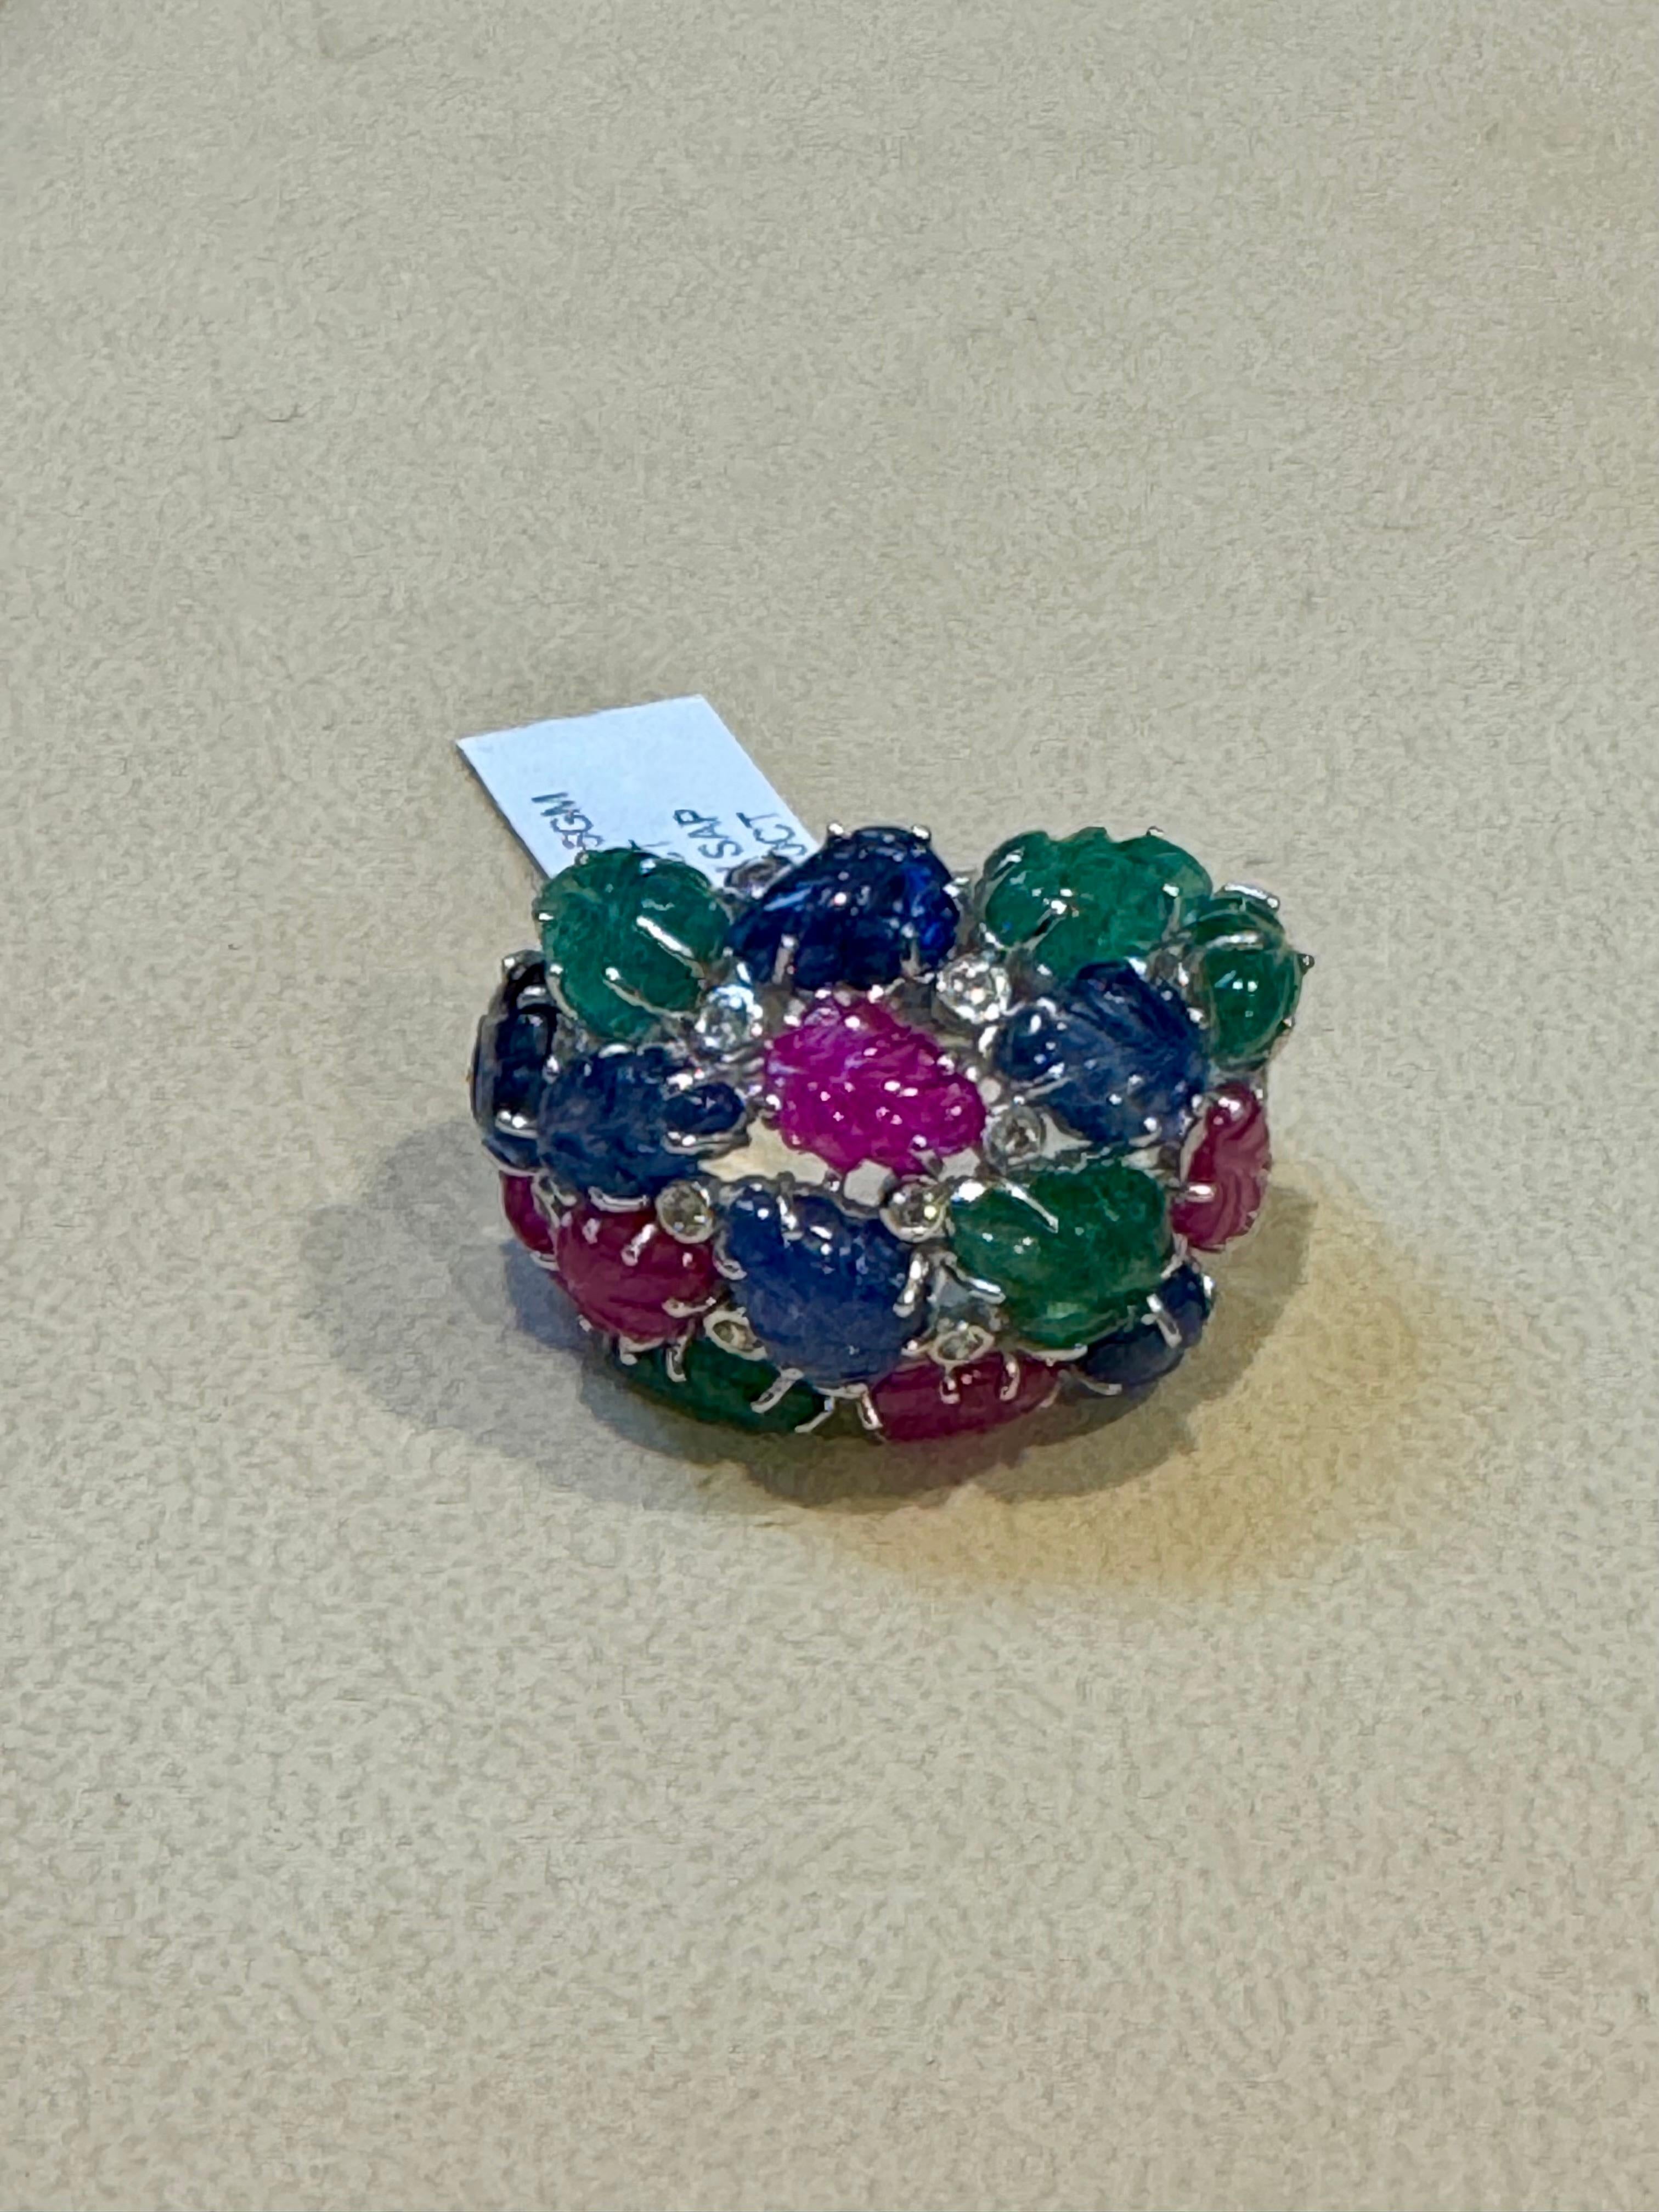 Huge Tutti Frutti 18K Ring, Natural Emeralds, Rubies, Sapphires  Diamonds Size 9 For Sale 2